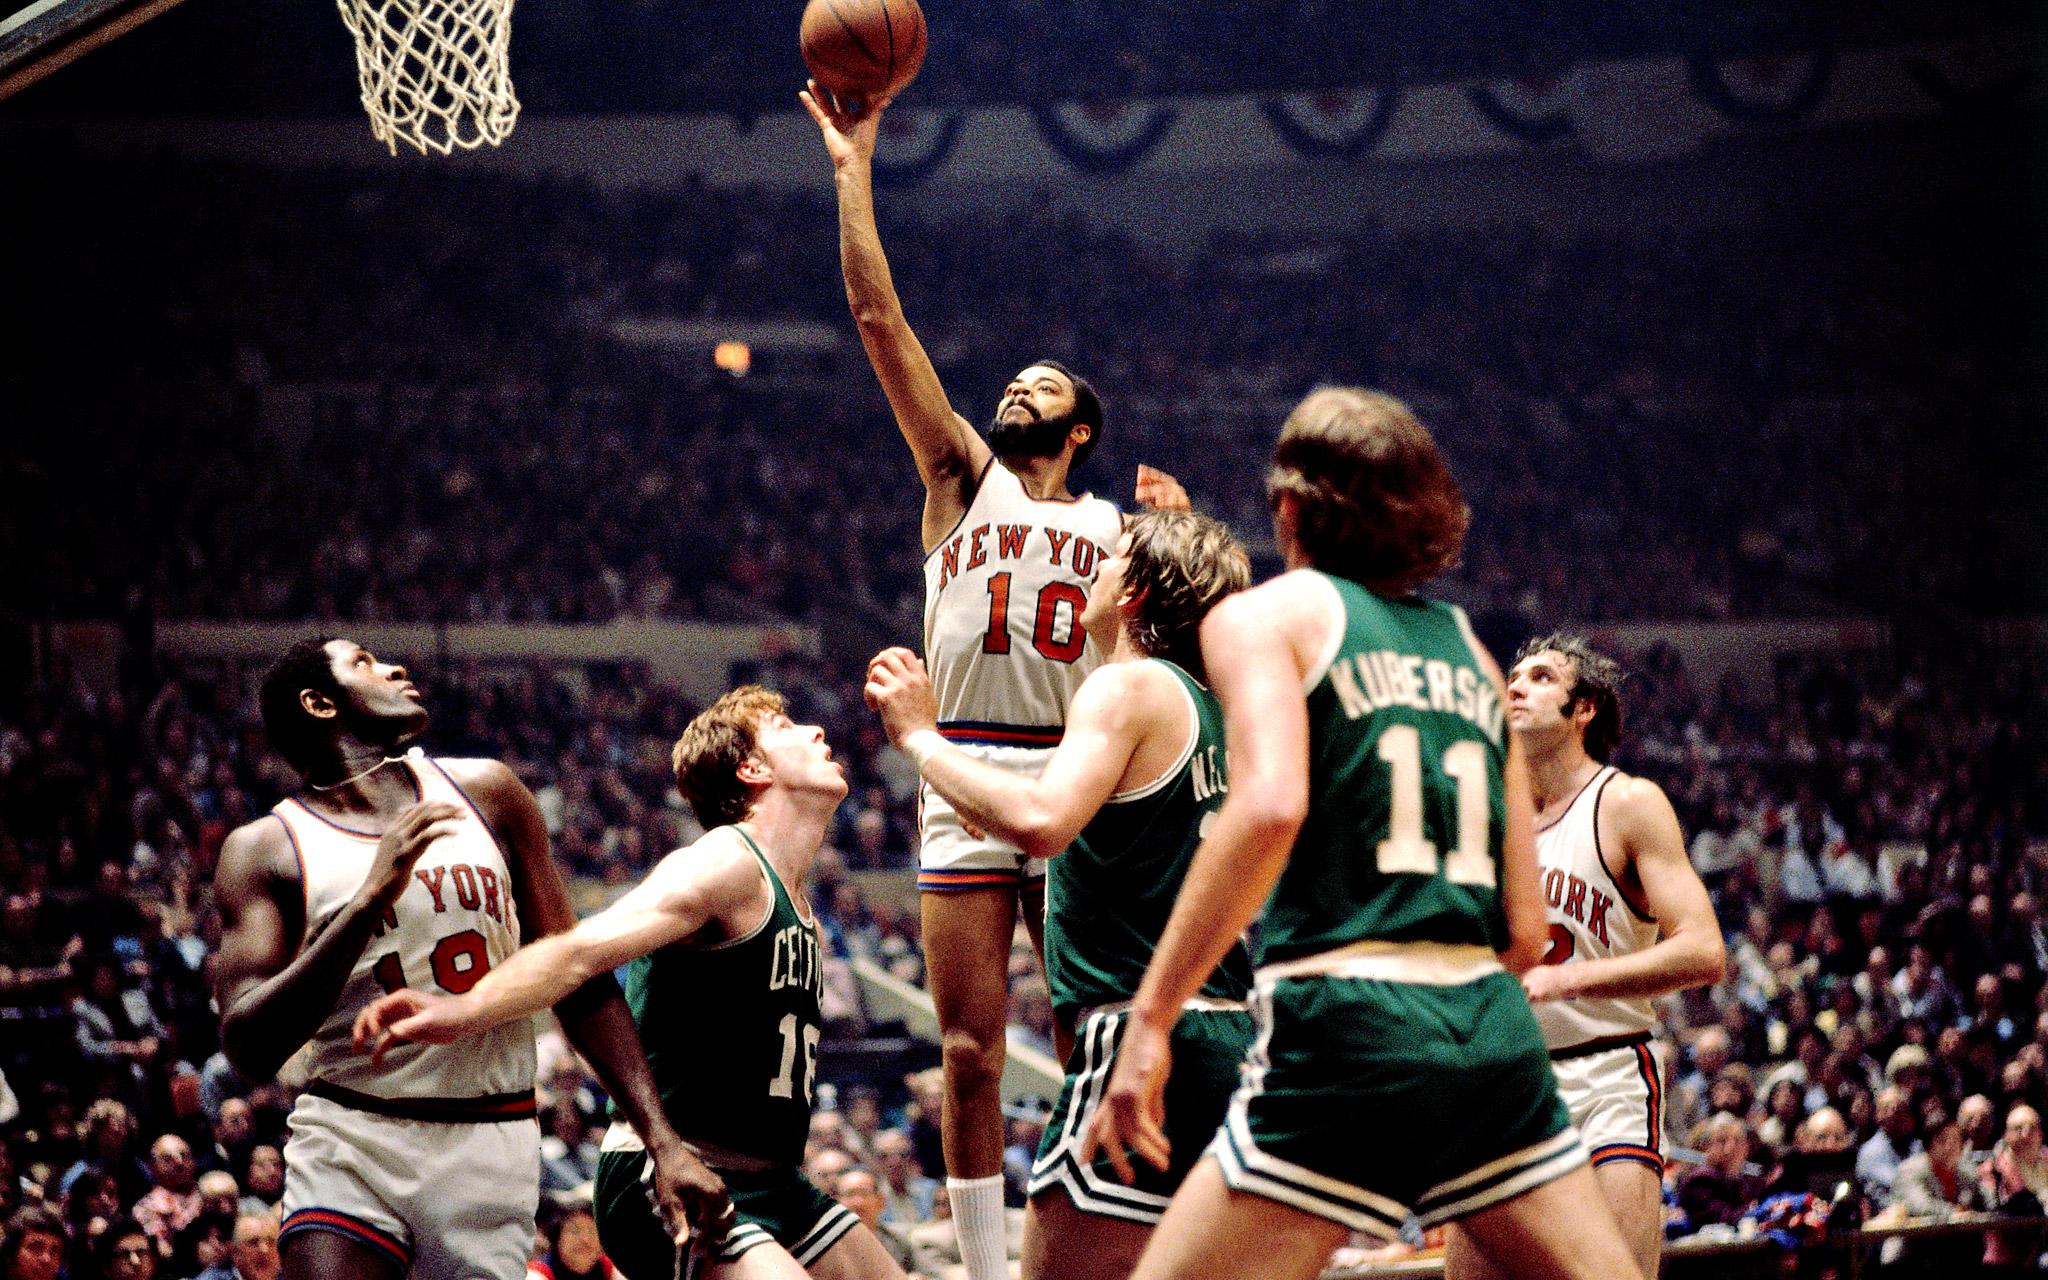 Happy Birthday to Hall of Famer, two-time Champ & Knicks legend, Walt Frazier. Defined \smooth\ in the 70s & beyond 